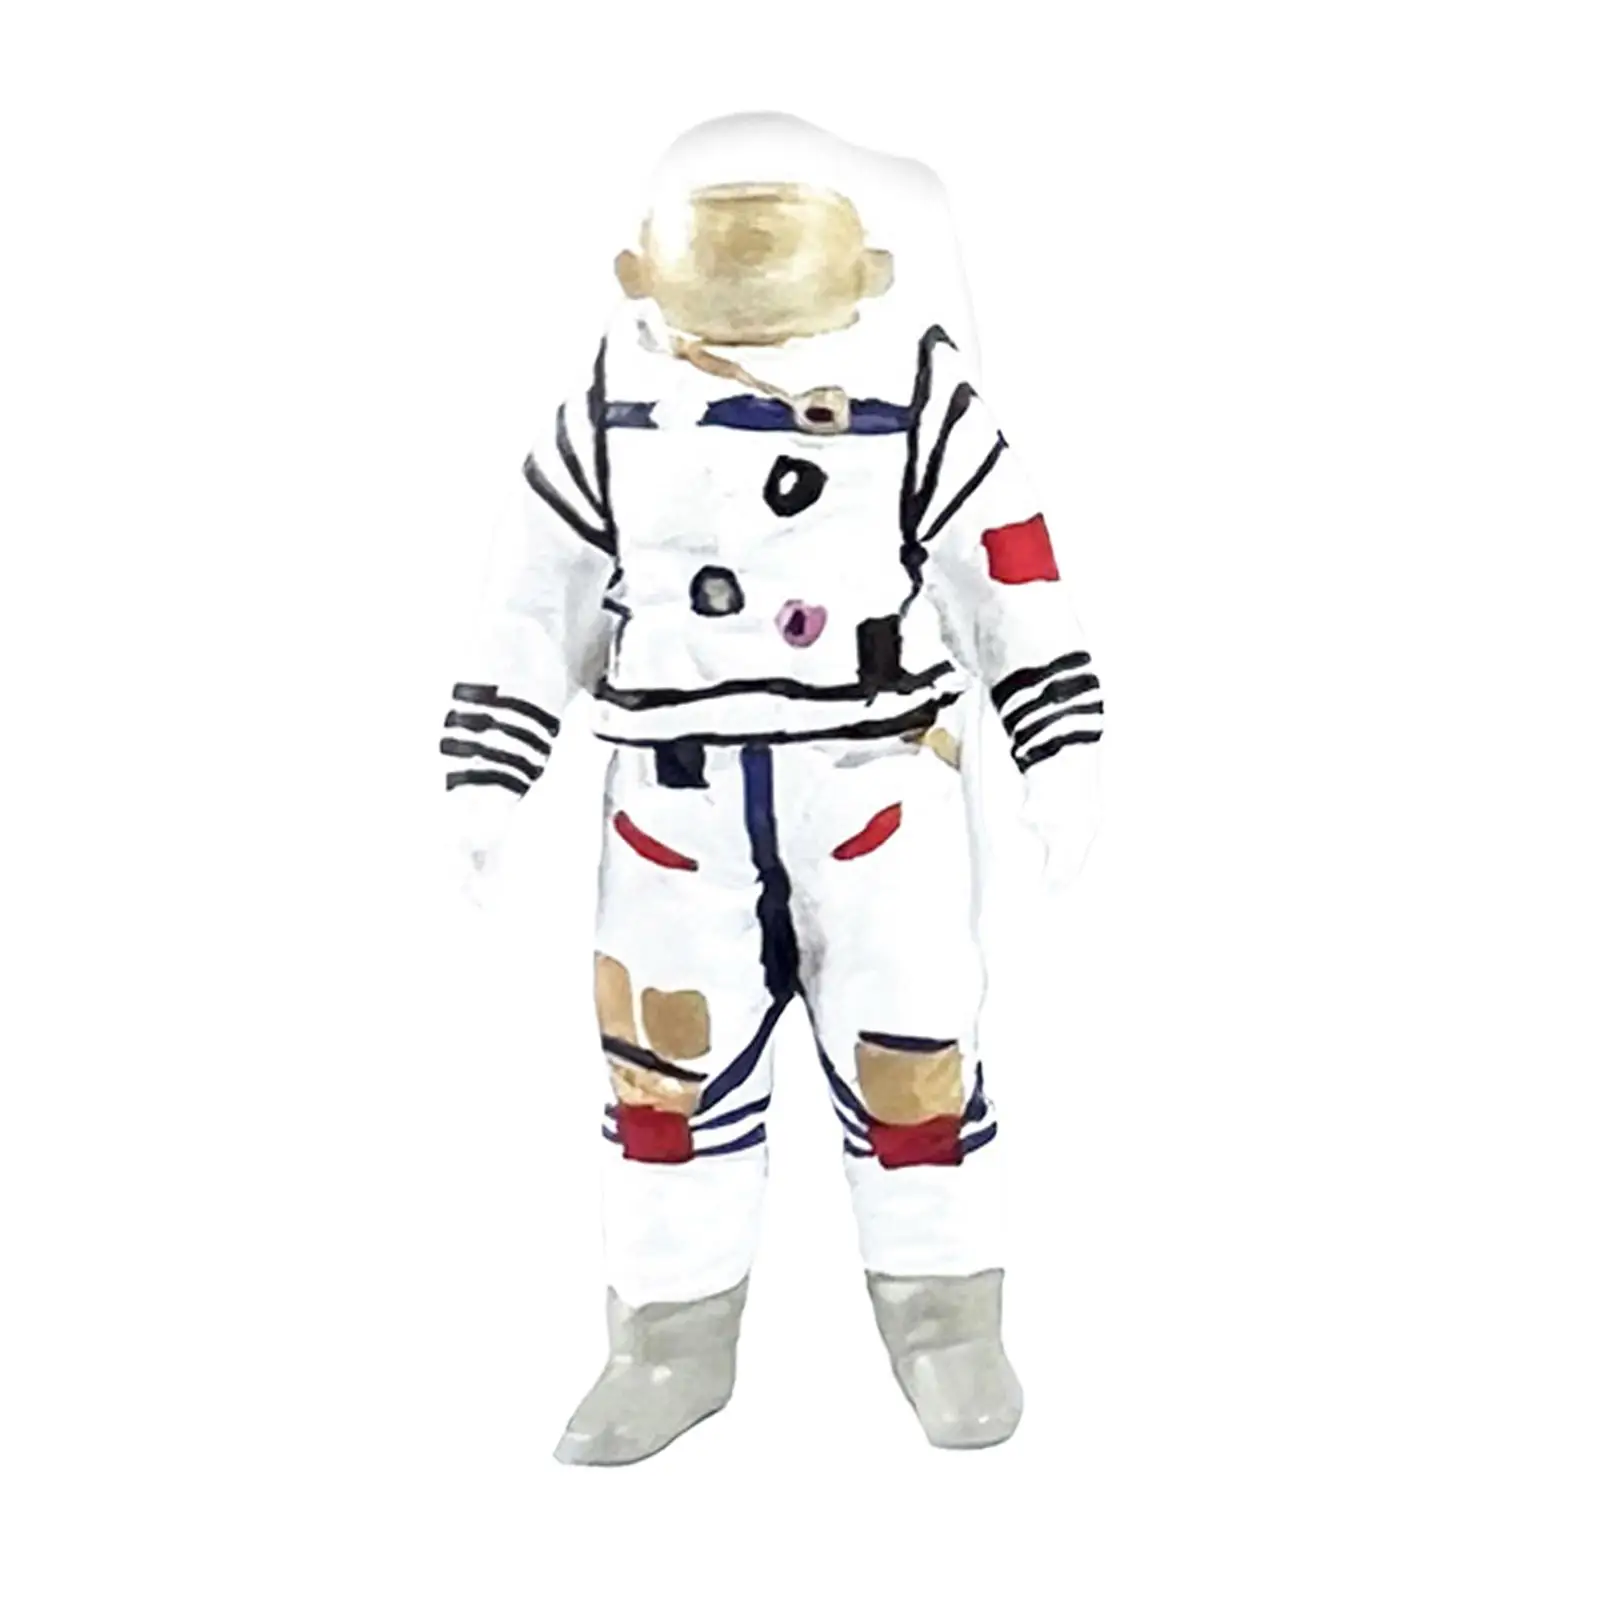 1/64 Astronaut Figurines Hand Painted Statue Miniature Astronaut Action Figure for Scenery Landscape Photography Props Layout